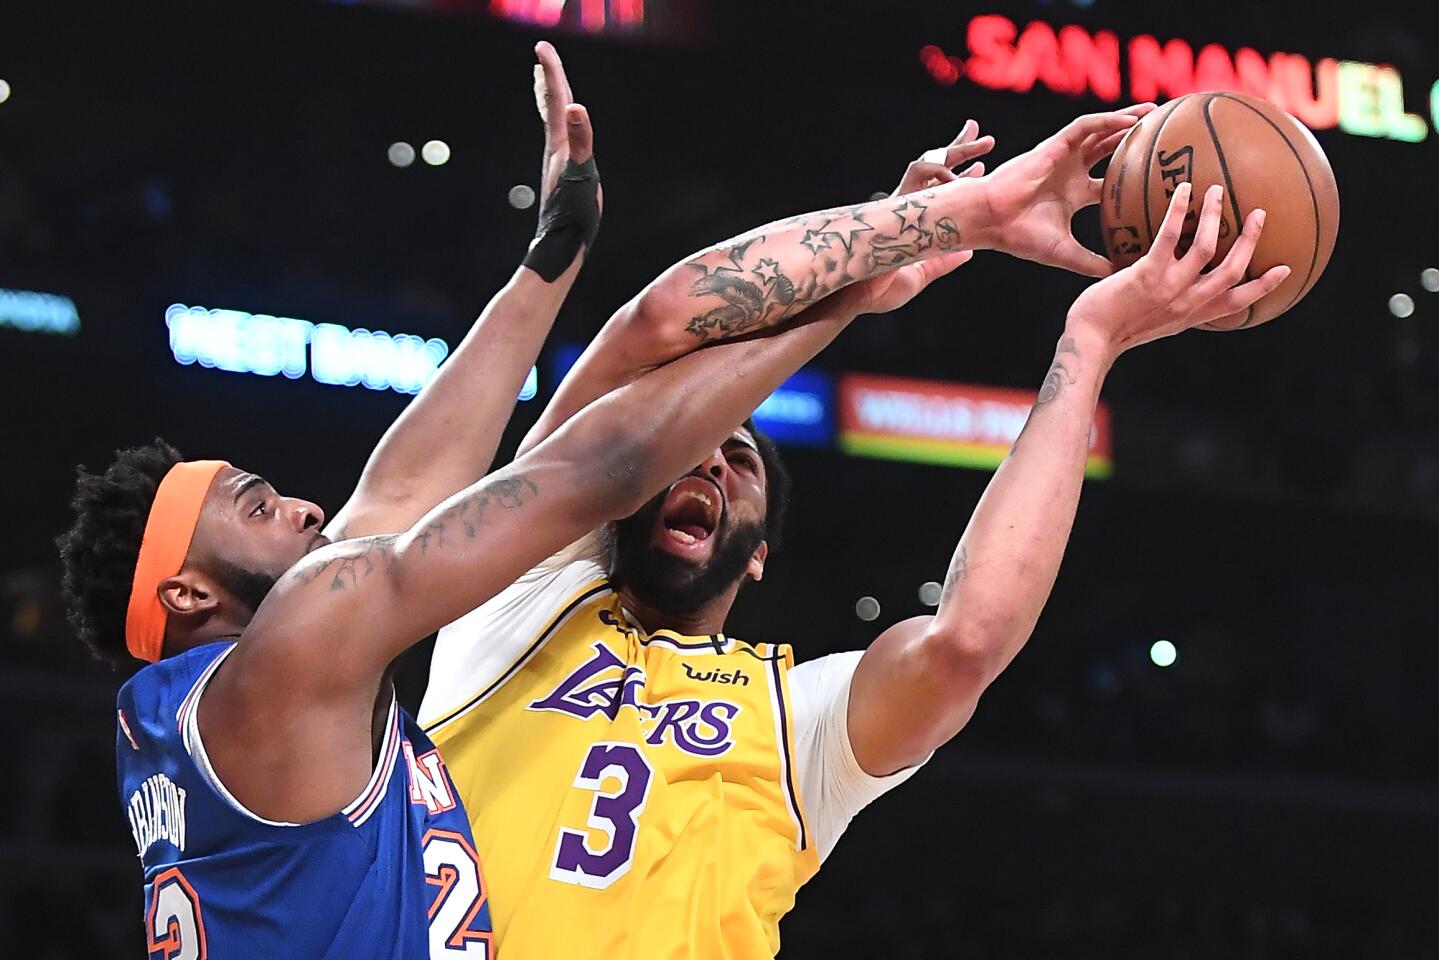 Anthony Davis is fouled by Knicks center Mitchell Robinson during the first quarter of a game Jan. 7 at Staples Center.